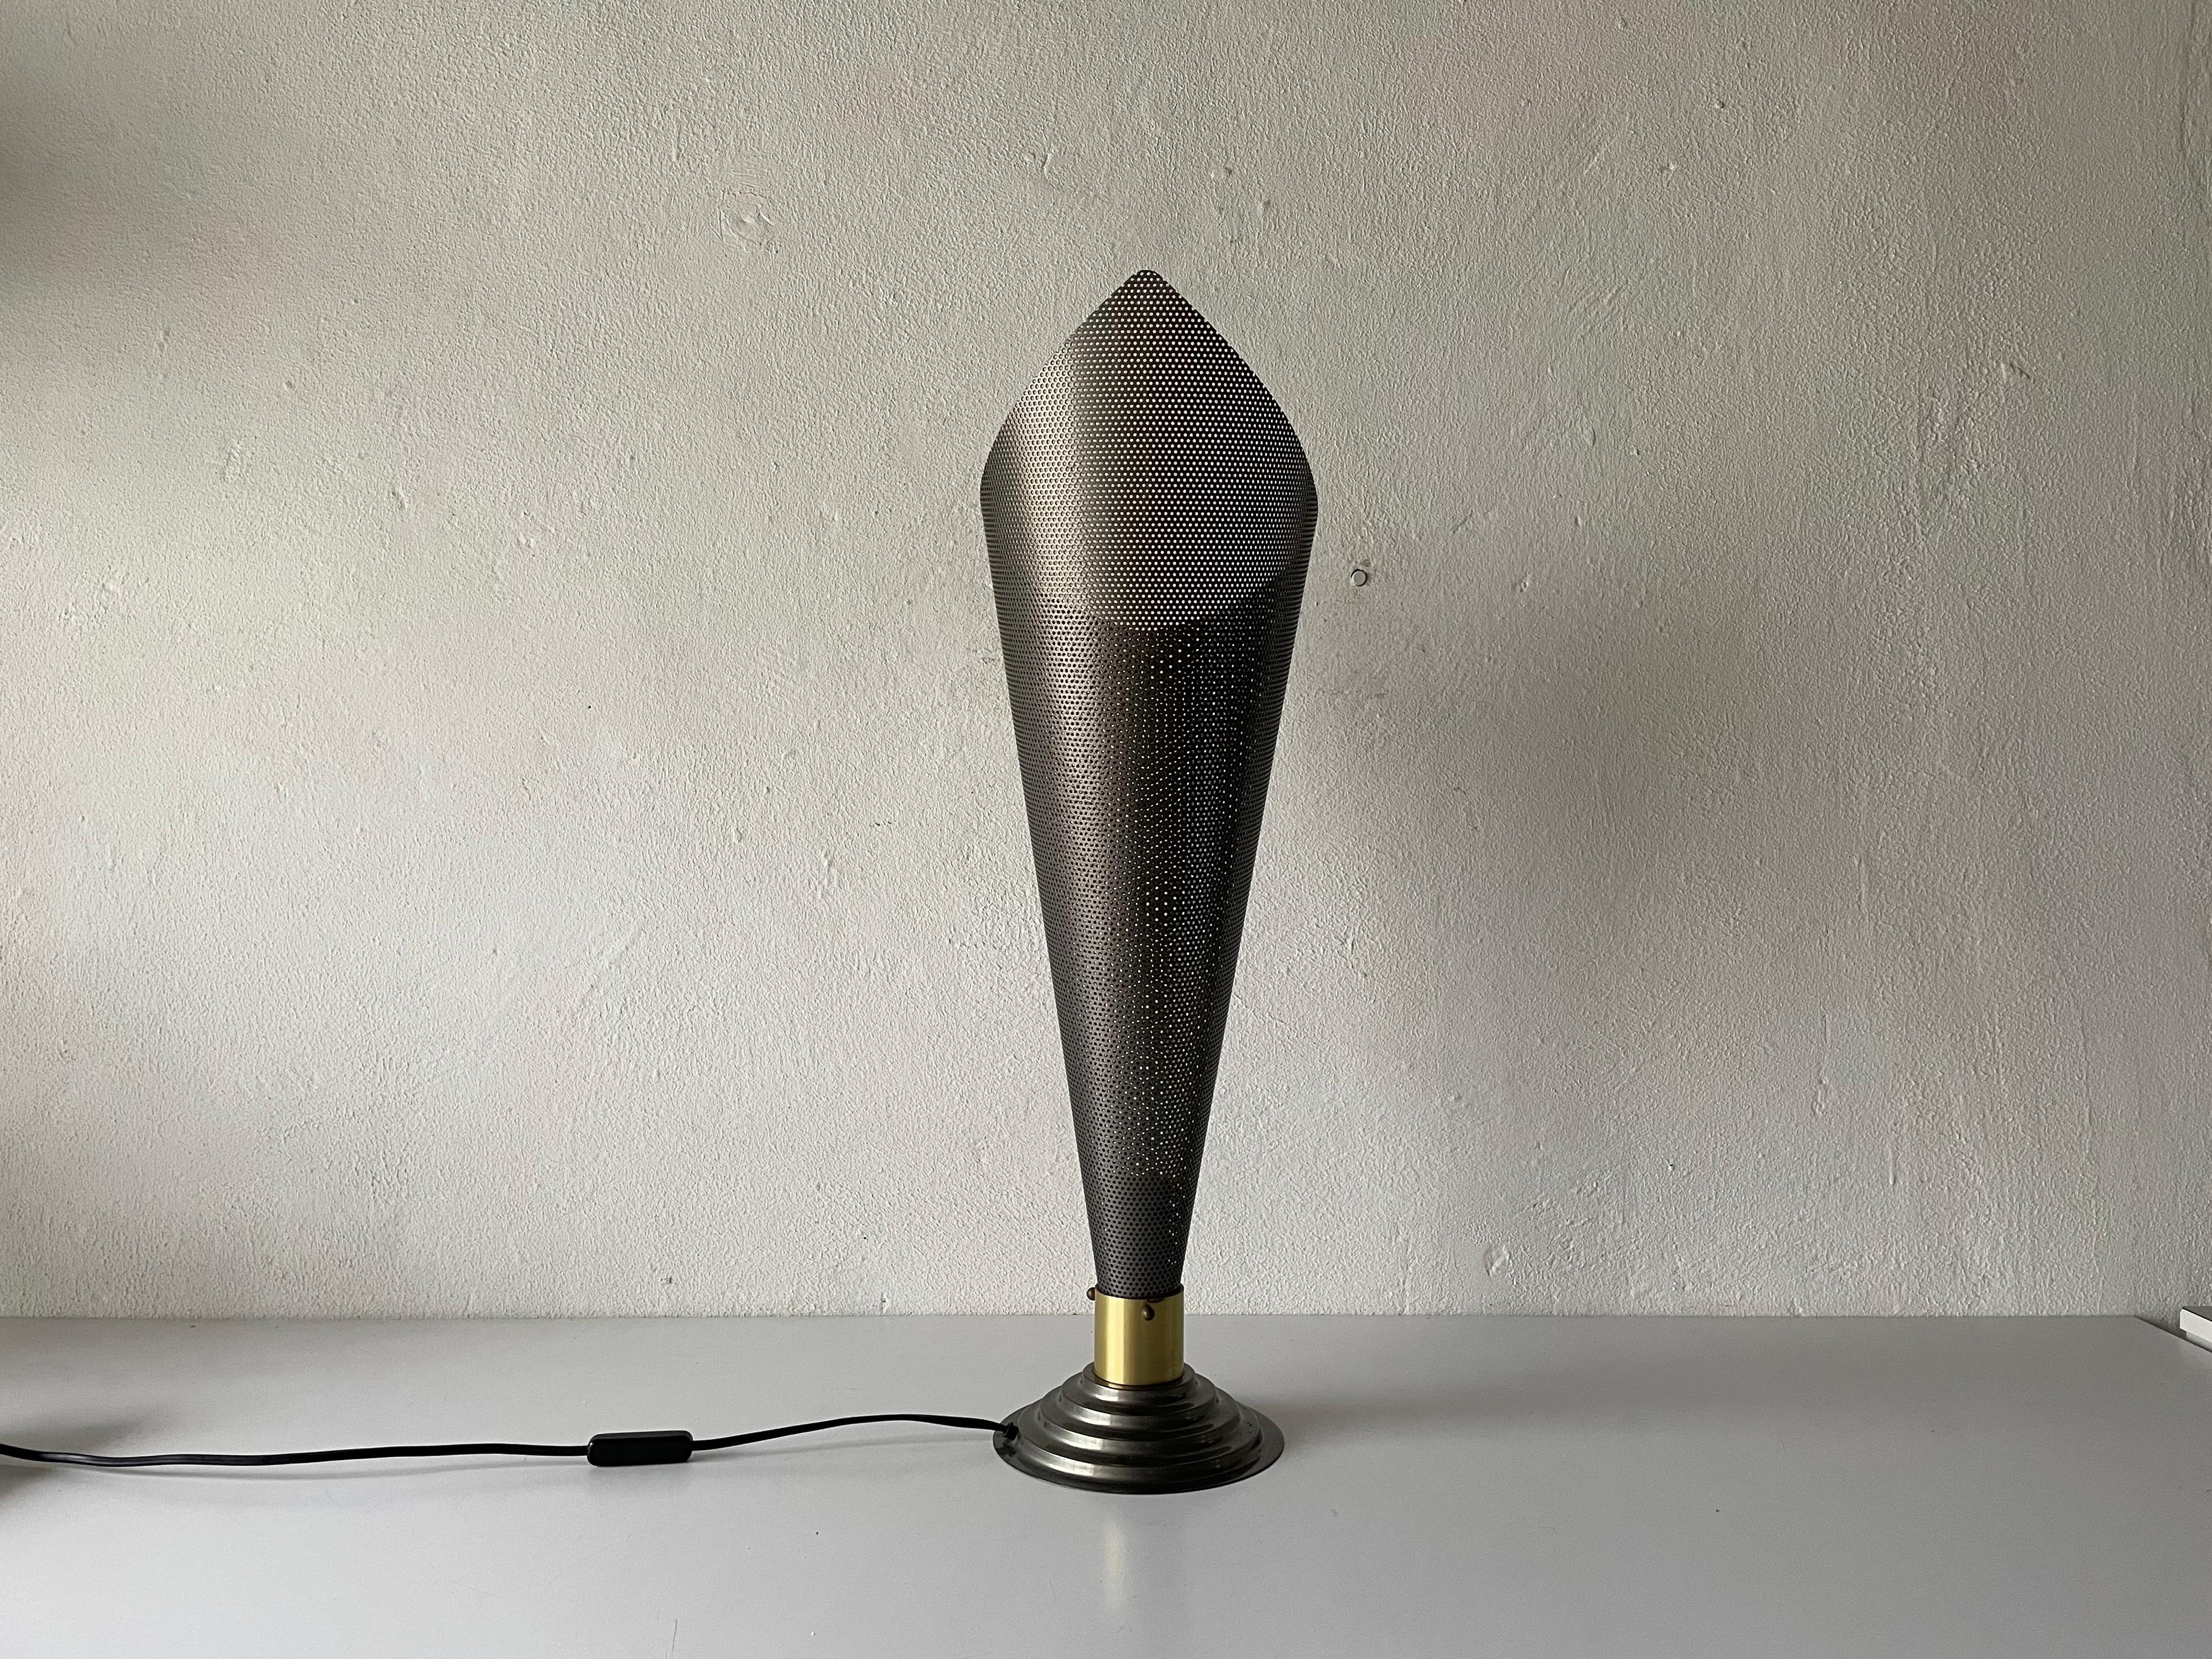 Grey Conic Design wonderful table lamp, In style of Mathieu Matégot, 1970s, Germany

Lampshade is in very good vintage condition.

This lamp works with E27 light bulbs. 
Wired and suitable to use with 220V and 110V for all